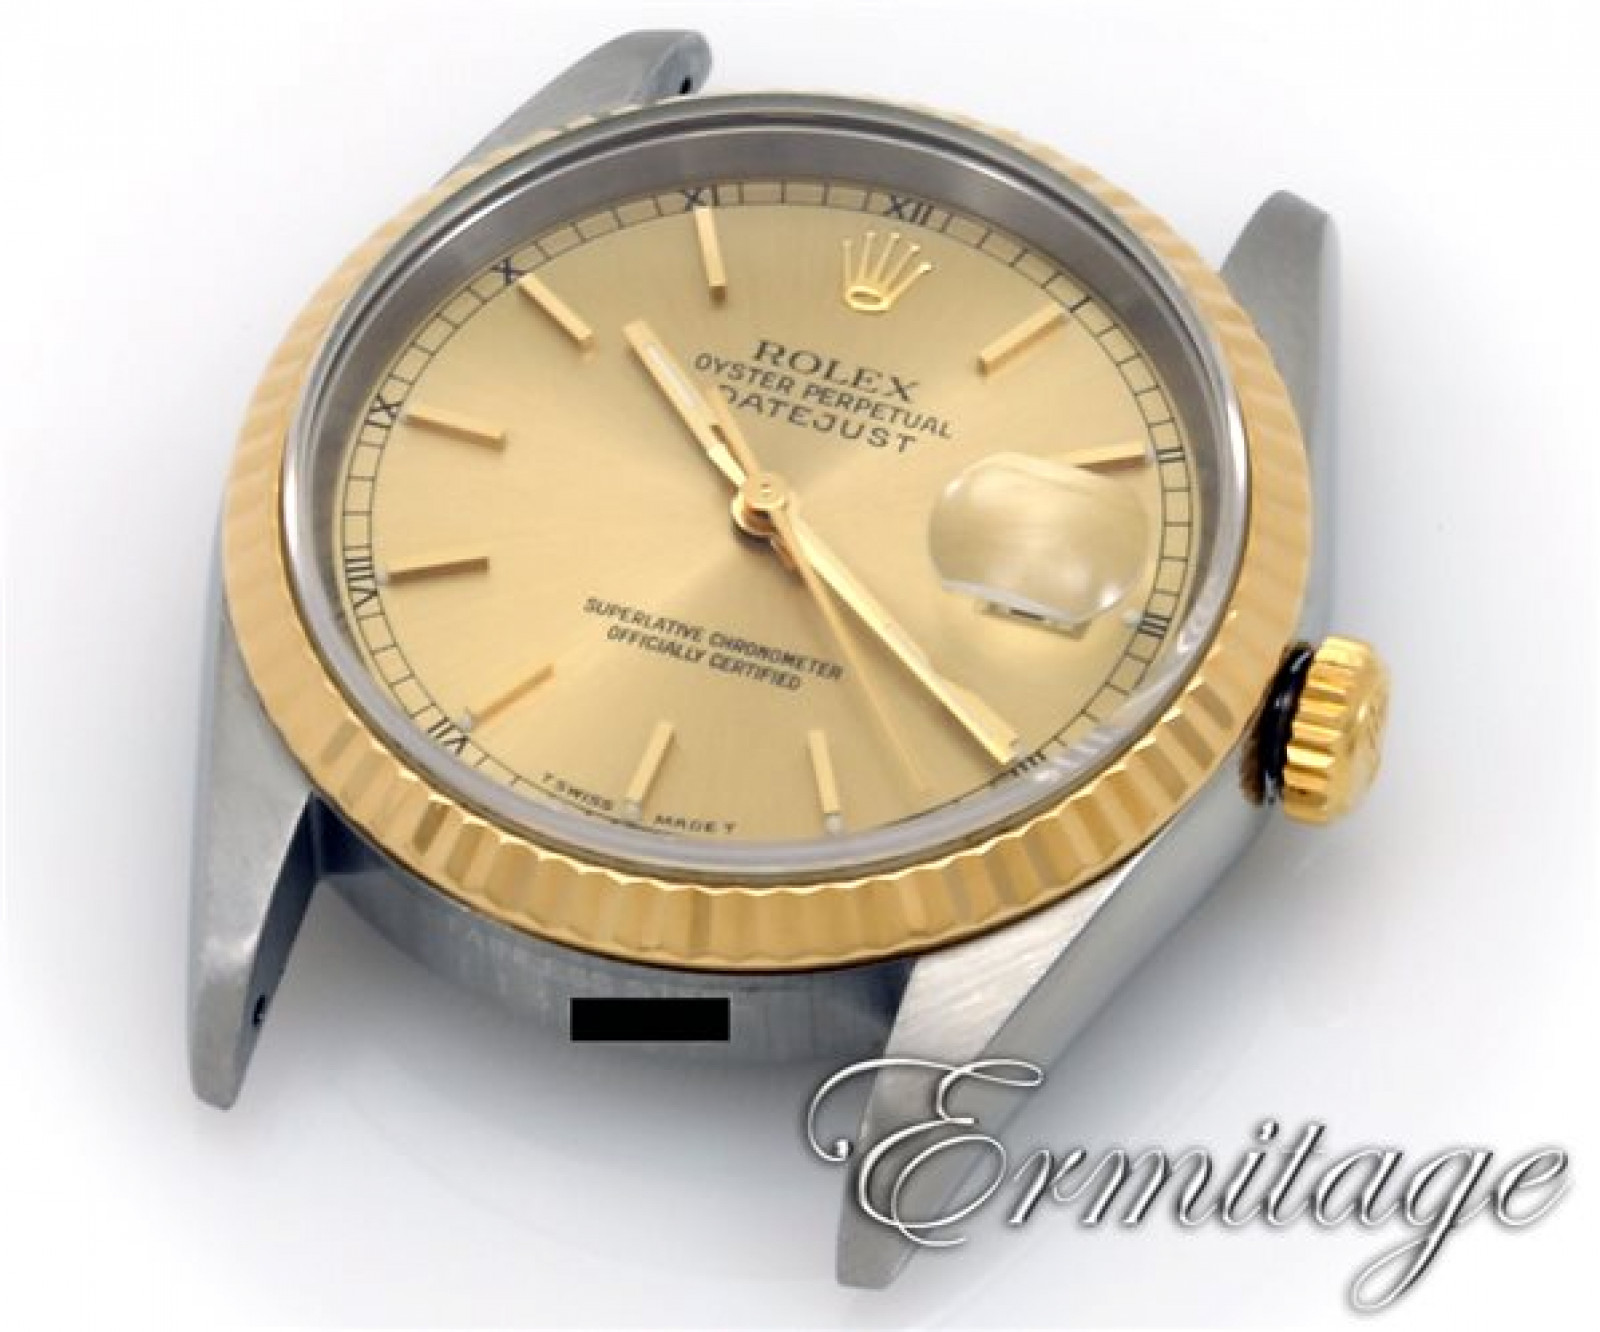 Rolex Datejust 16233 Gold & Steel Oyster Perpetual